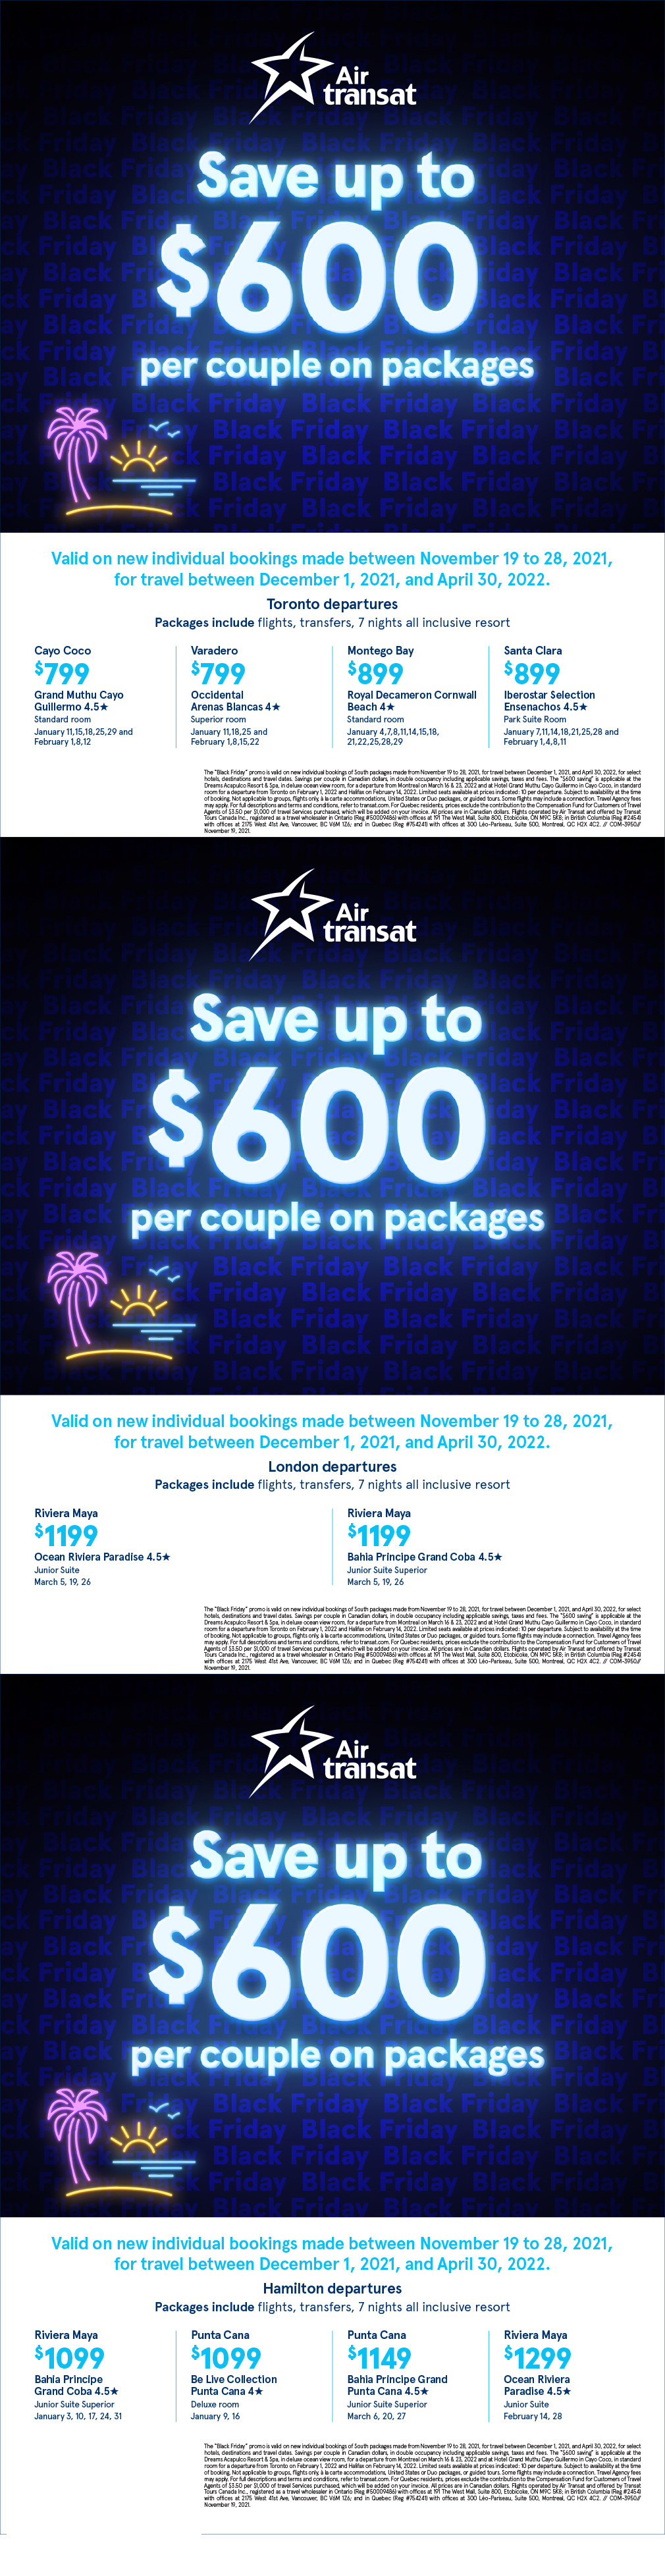 Save up to $600 Per Couple On South Packages